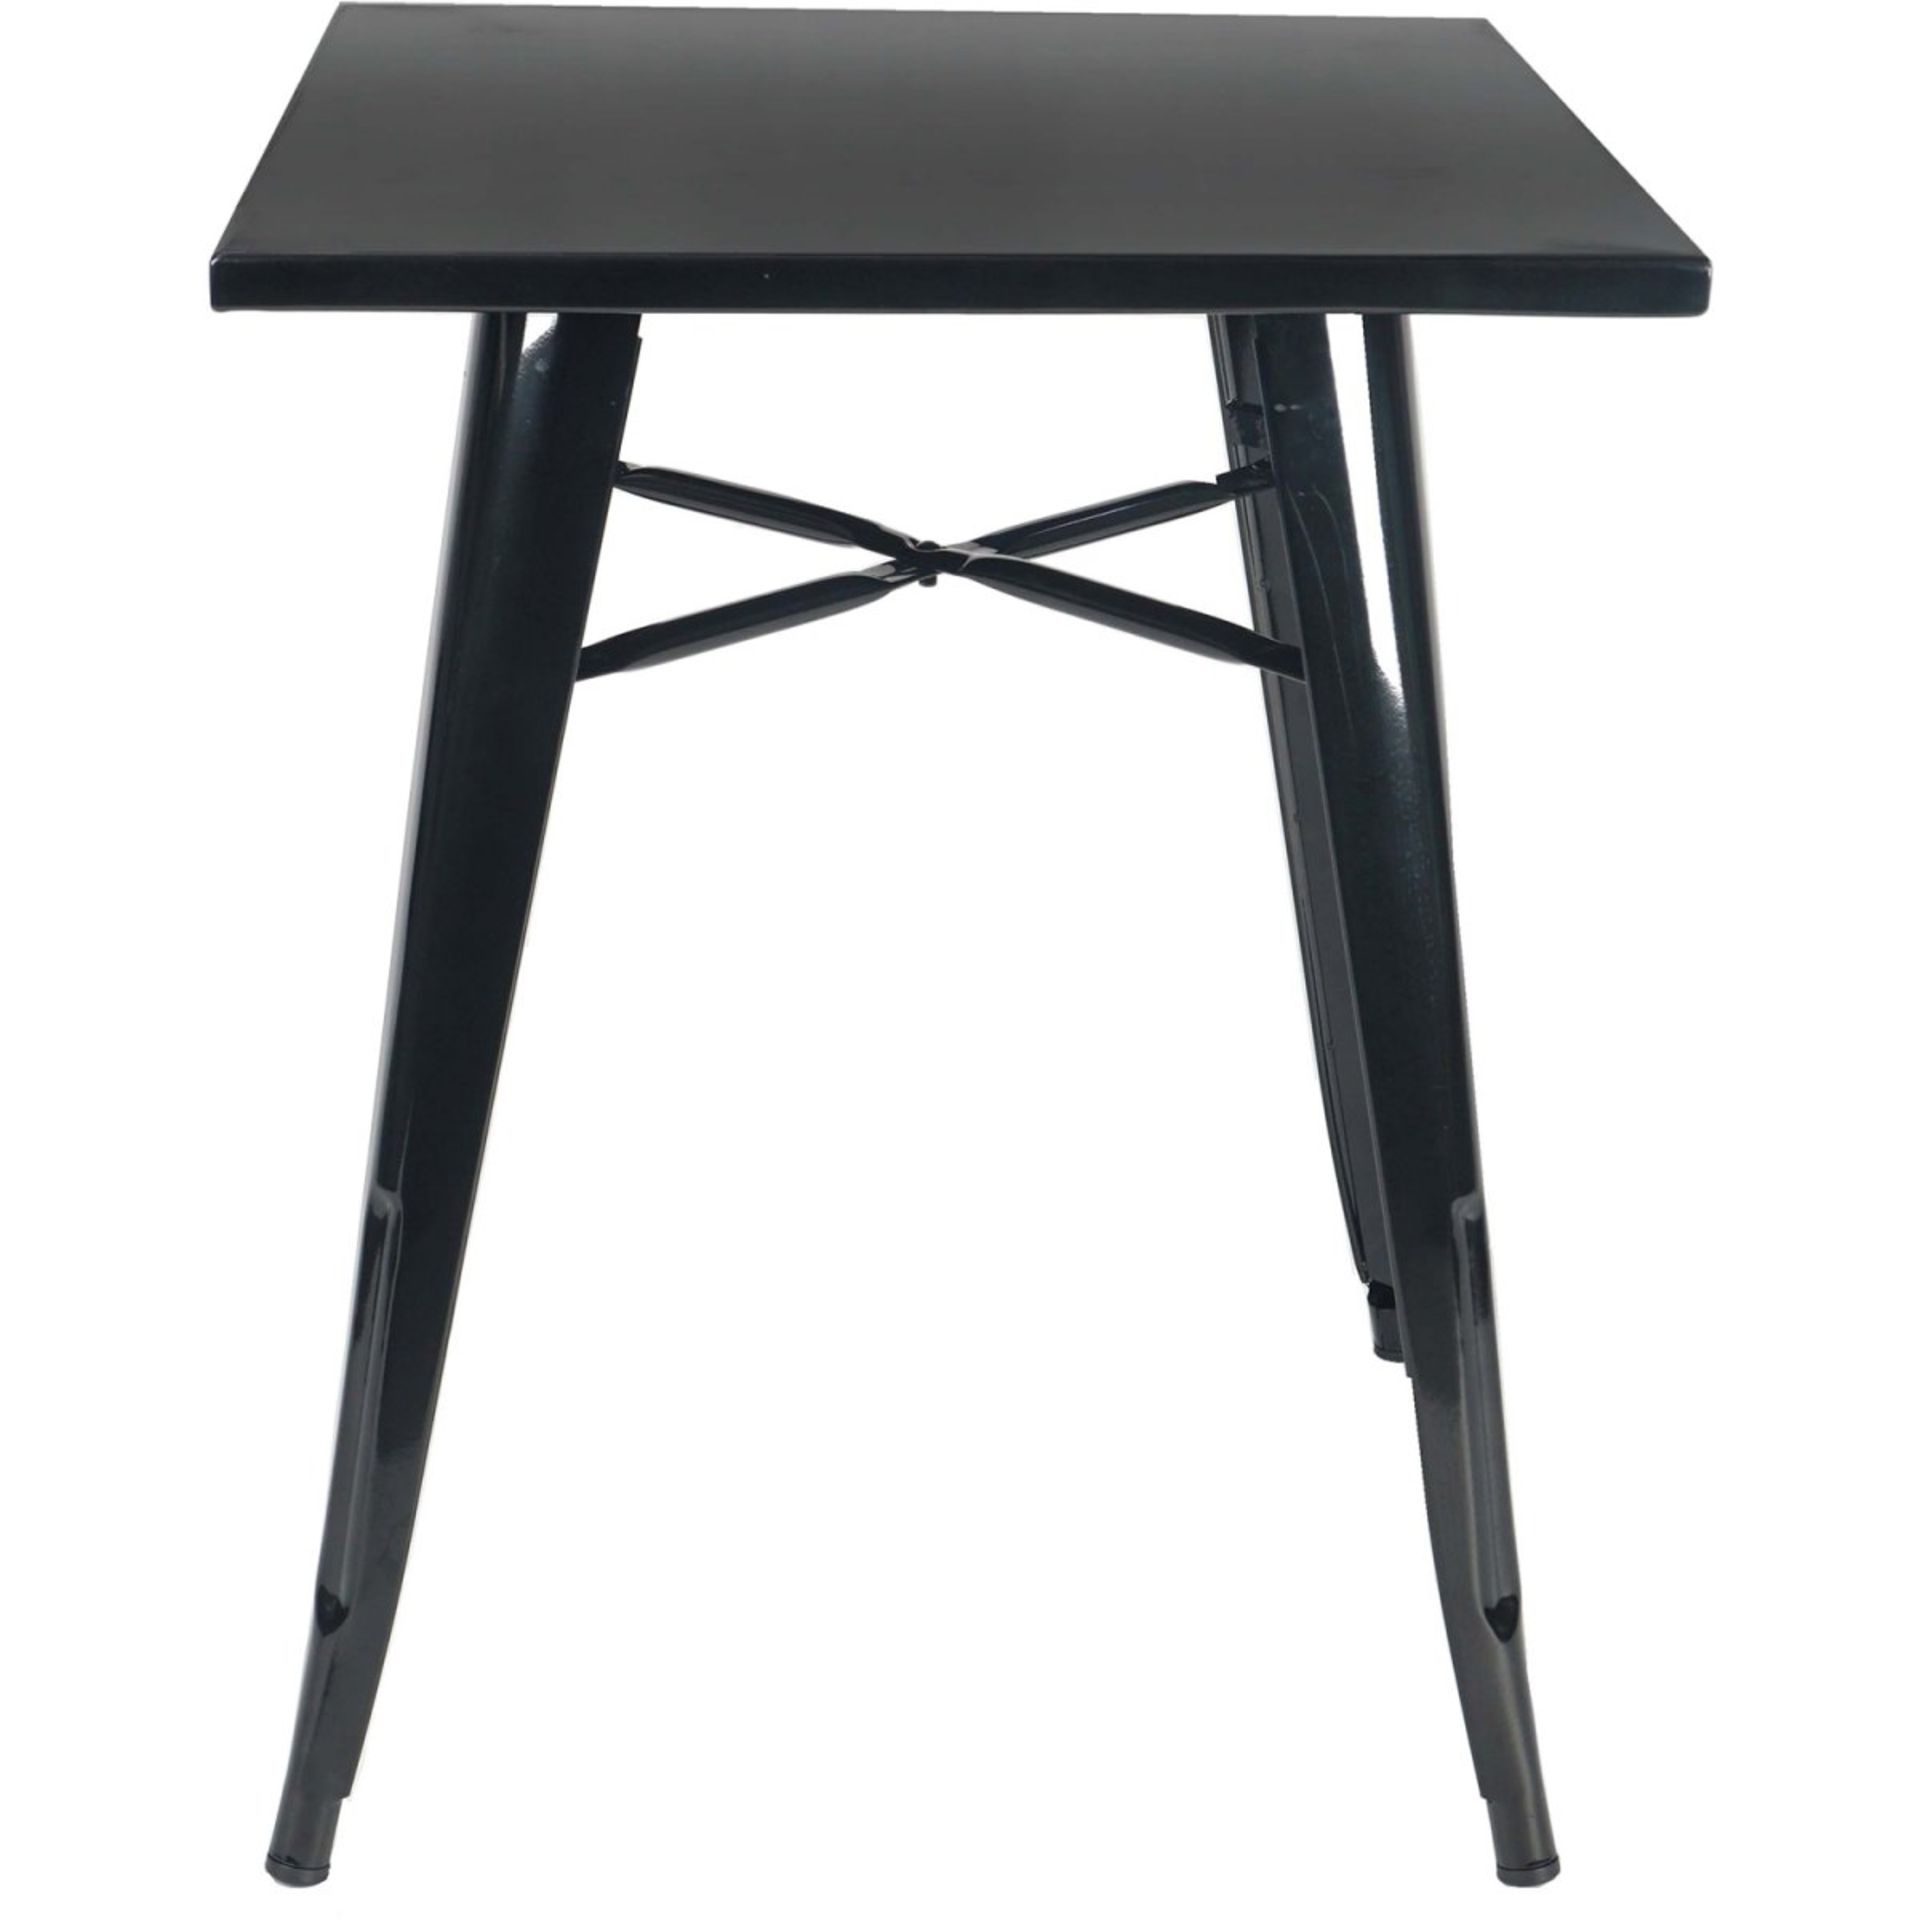 1 x Tolix Industrial Style Outdoor Bistro Table and Chair Set in Black - Includes 1 x Table and 4 - Image 6 of 7